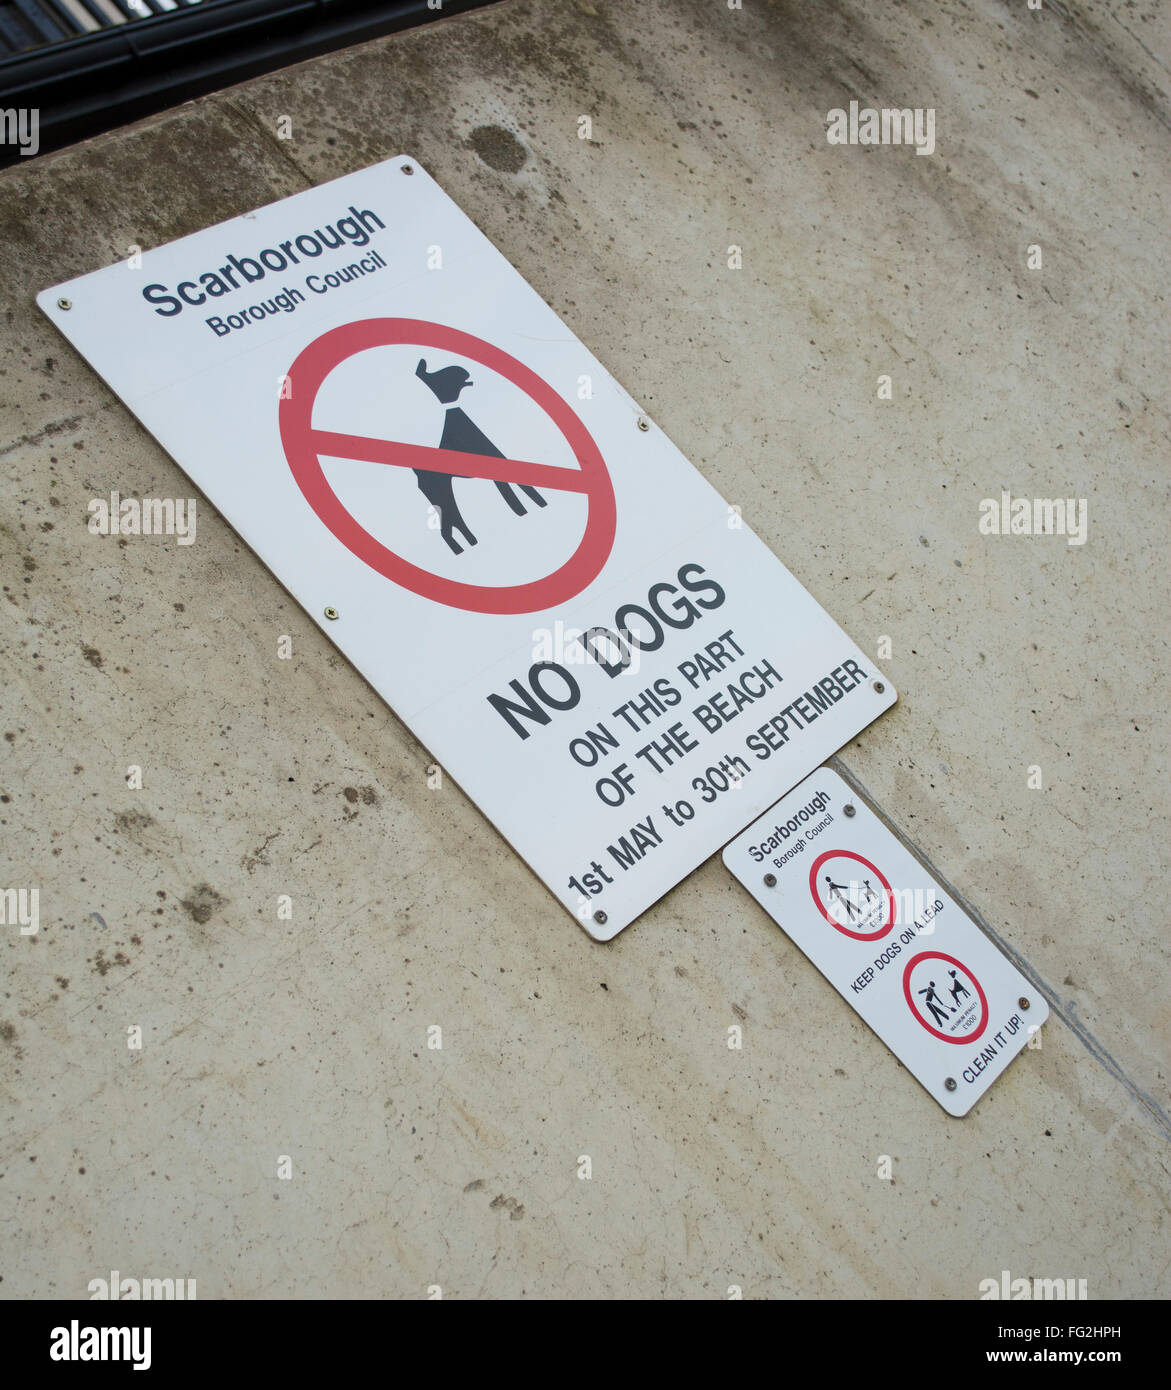 No dogs on beach sign. Scarborough Borough Council. Attached to concrete sea wall. Gives date as 1st May to 30th September. Stock Photo